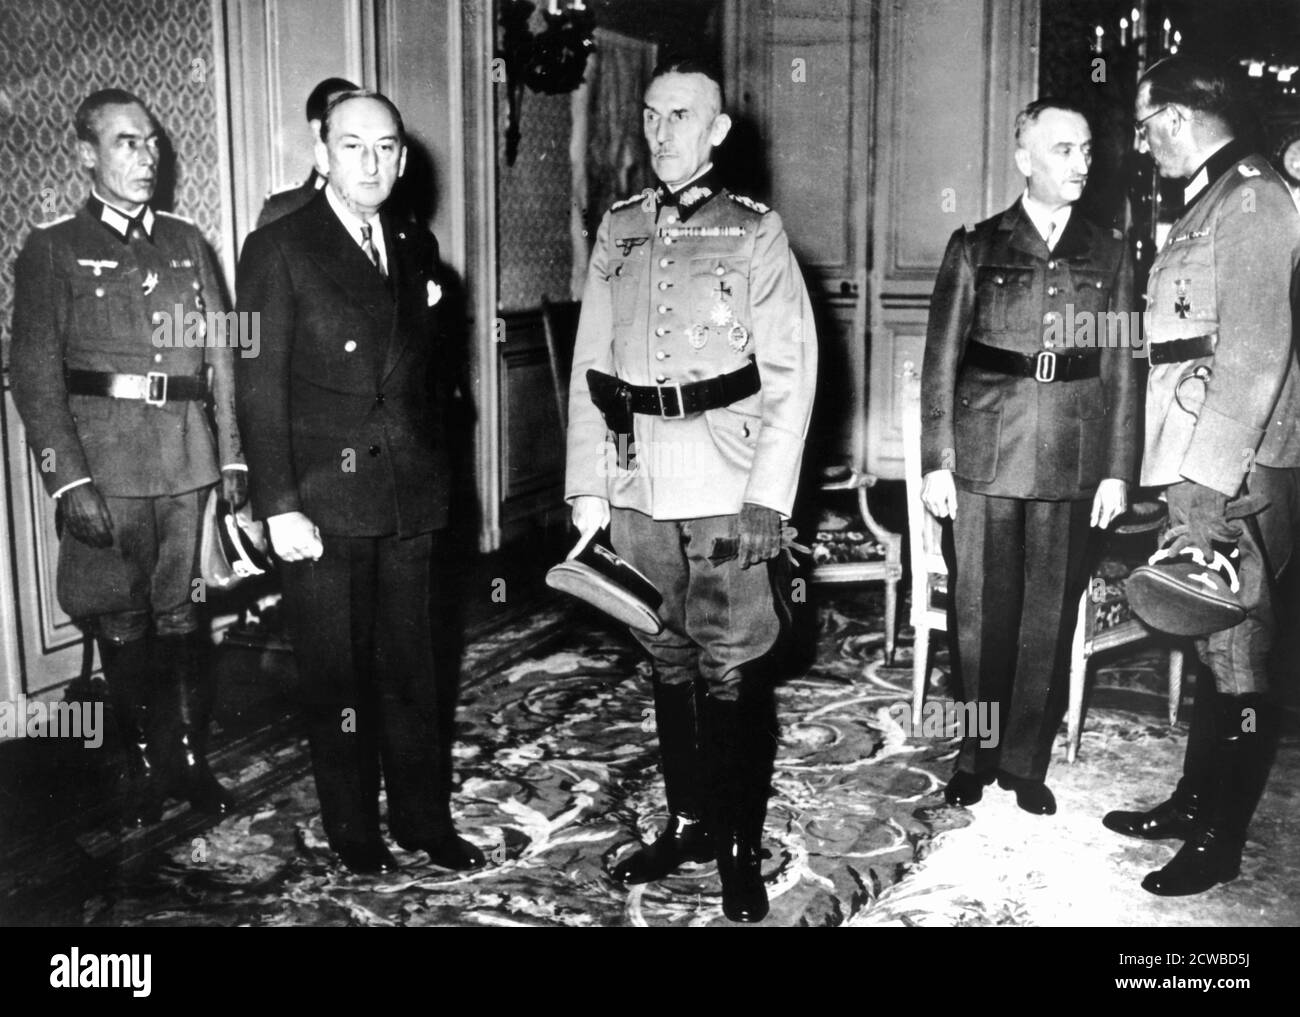 Meeting between German officers and French Vichy government officials, France, 1940-1944. German officers, including Colonel Hans Speidel (right) meeting the Vichy French Minister of Defence, General Bridoux and the Vichy ambassador to the German High Command in Paris, Fernand de Brinon. The photographer is unknown. Stock Photo